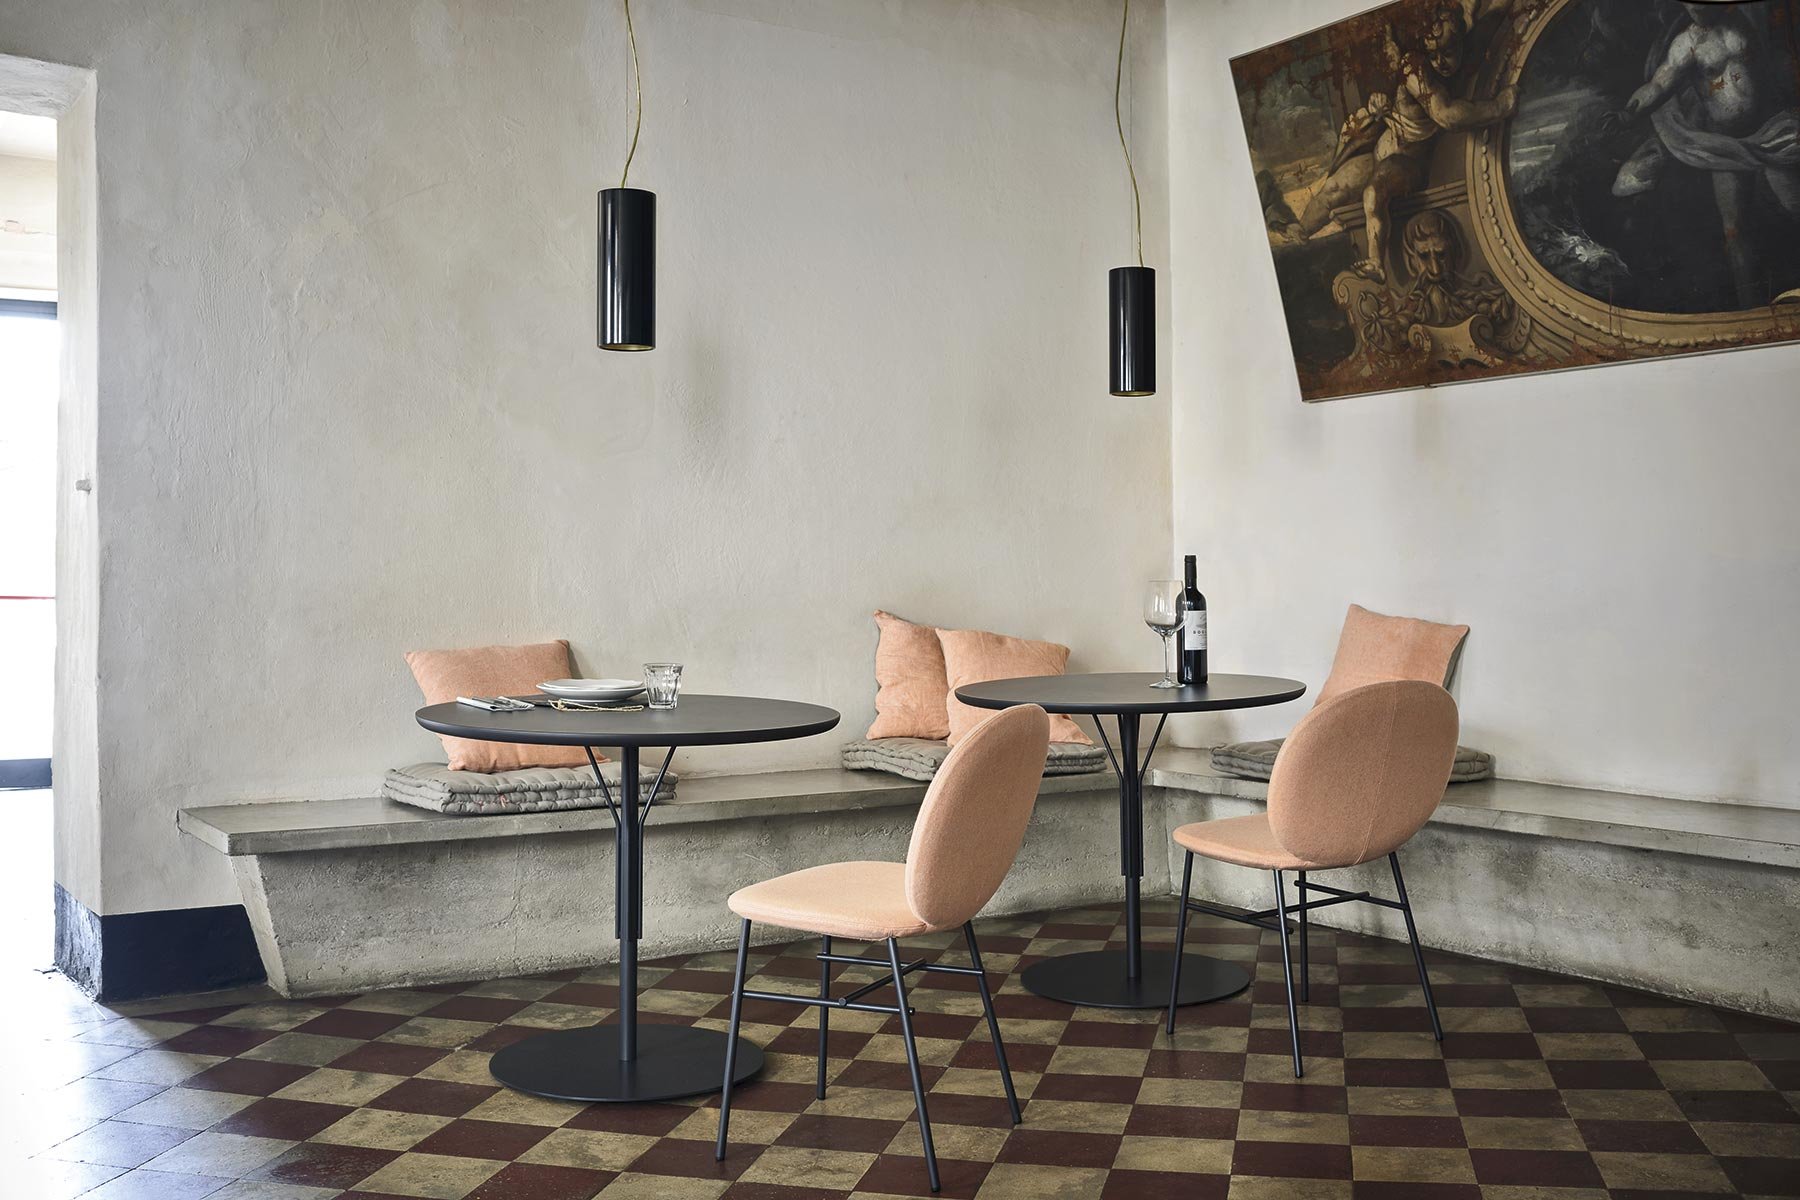 Kelly C Chair from Tacchini, designed by Claesson Koivisto Rune